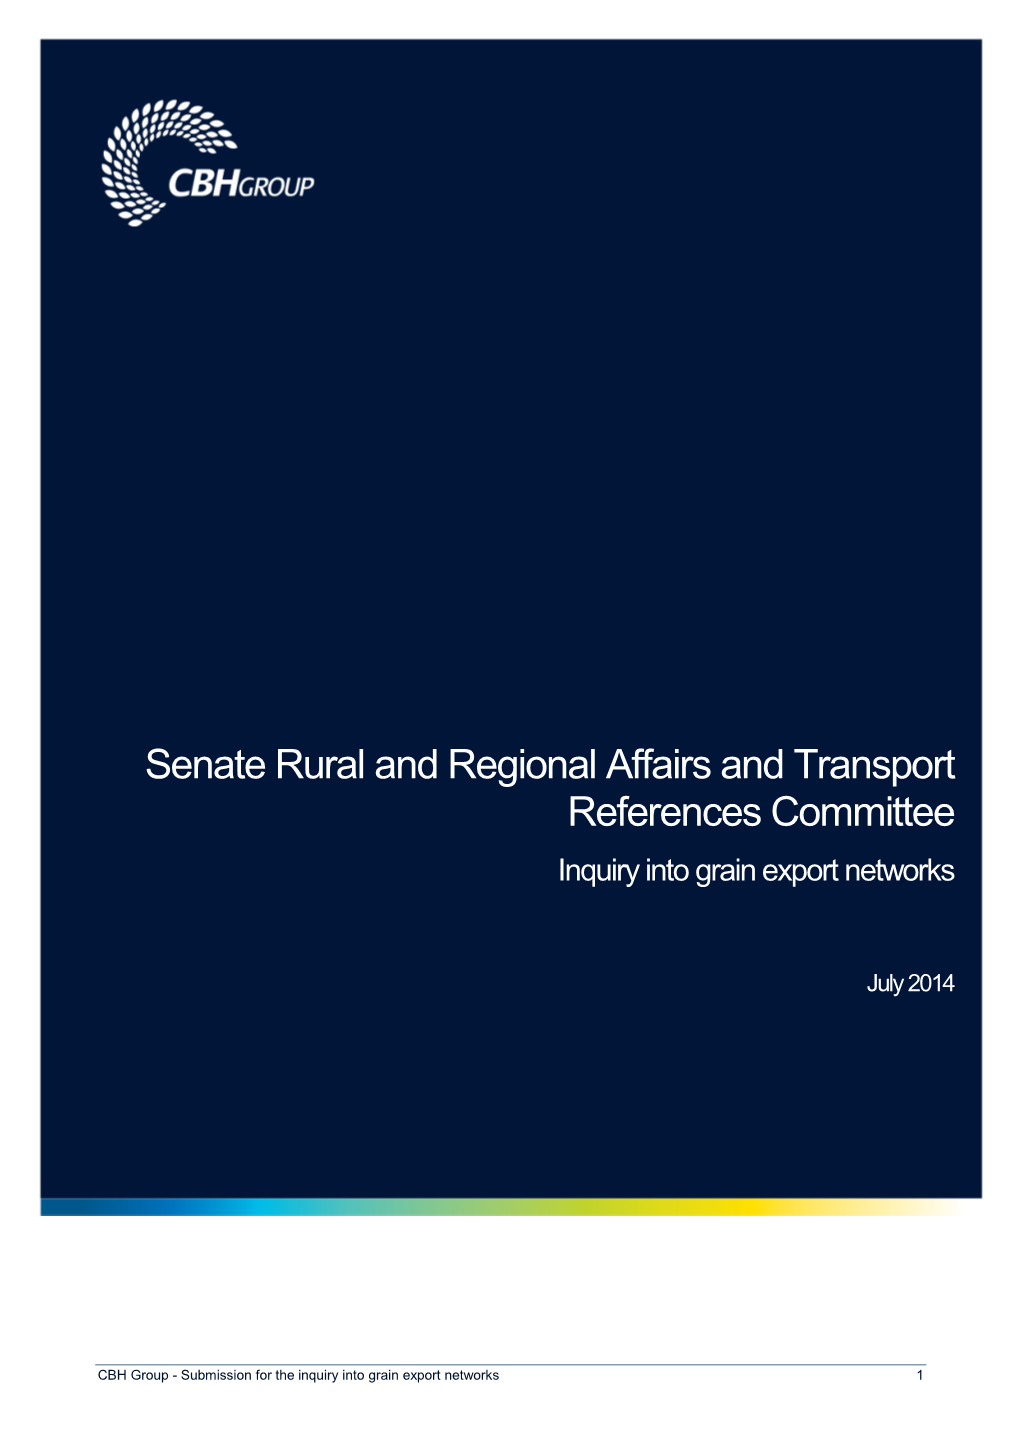 CBH Group - Submission for the Inquiry Into Grain Export Networks 1 CBH Group Submission - Rural and Regional Affairs and Transport References Committee